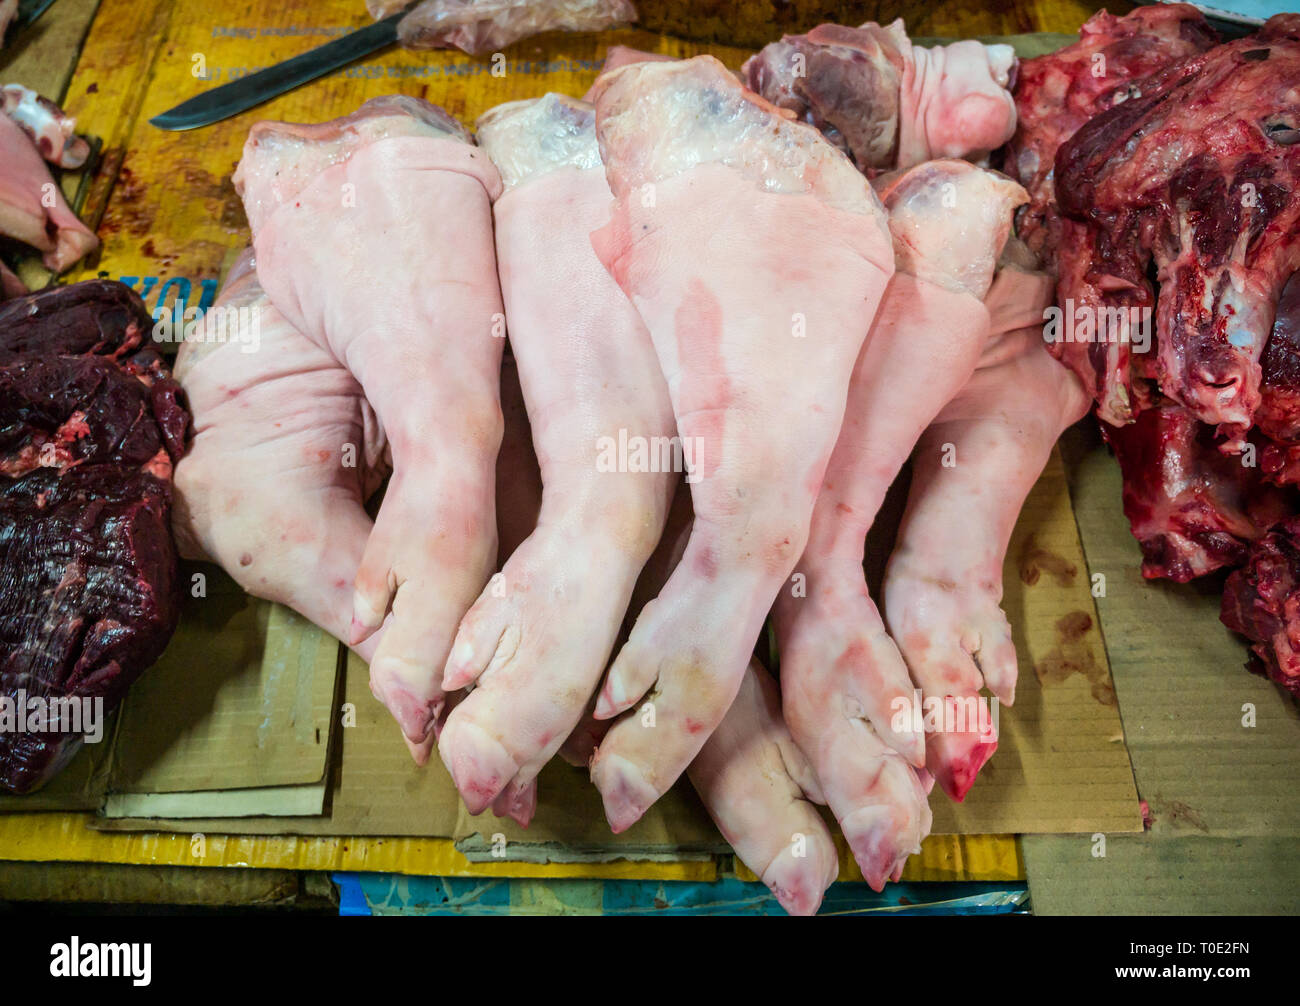 Pigs legs and trotters for sale at meat market stall, Phosy day market, Luang Prabang, Laos, SE Asia Stock Photo